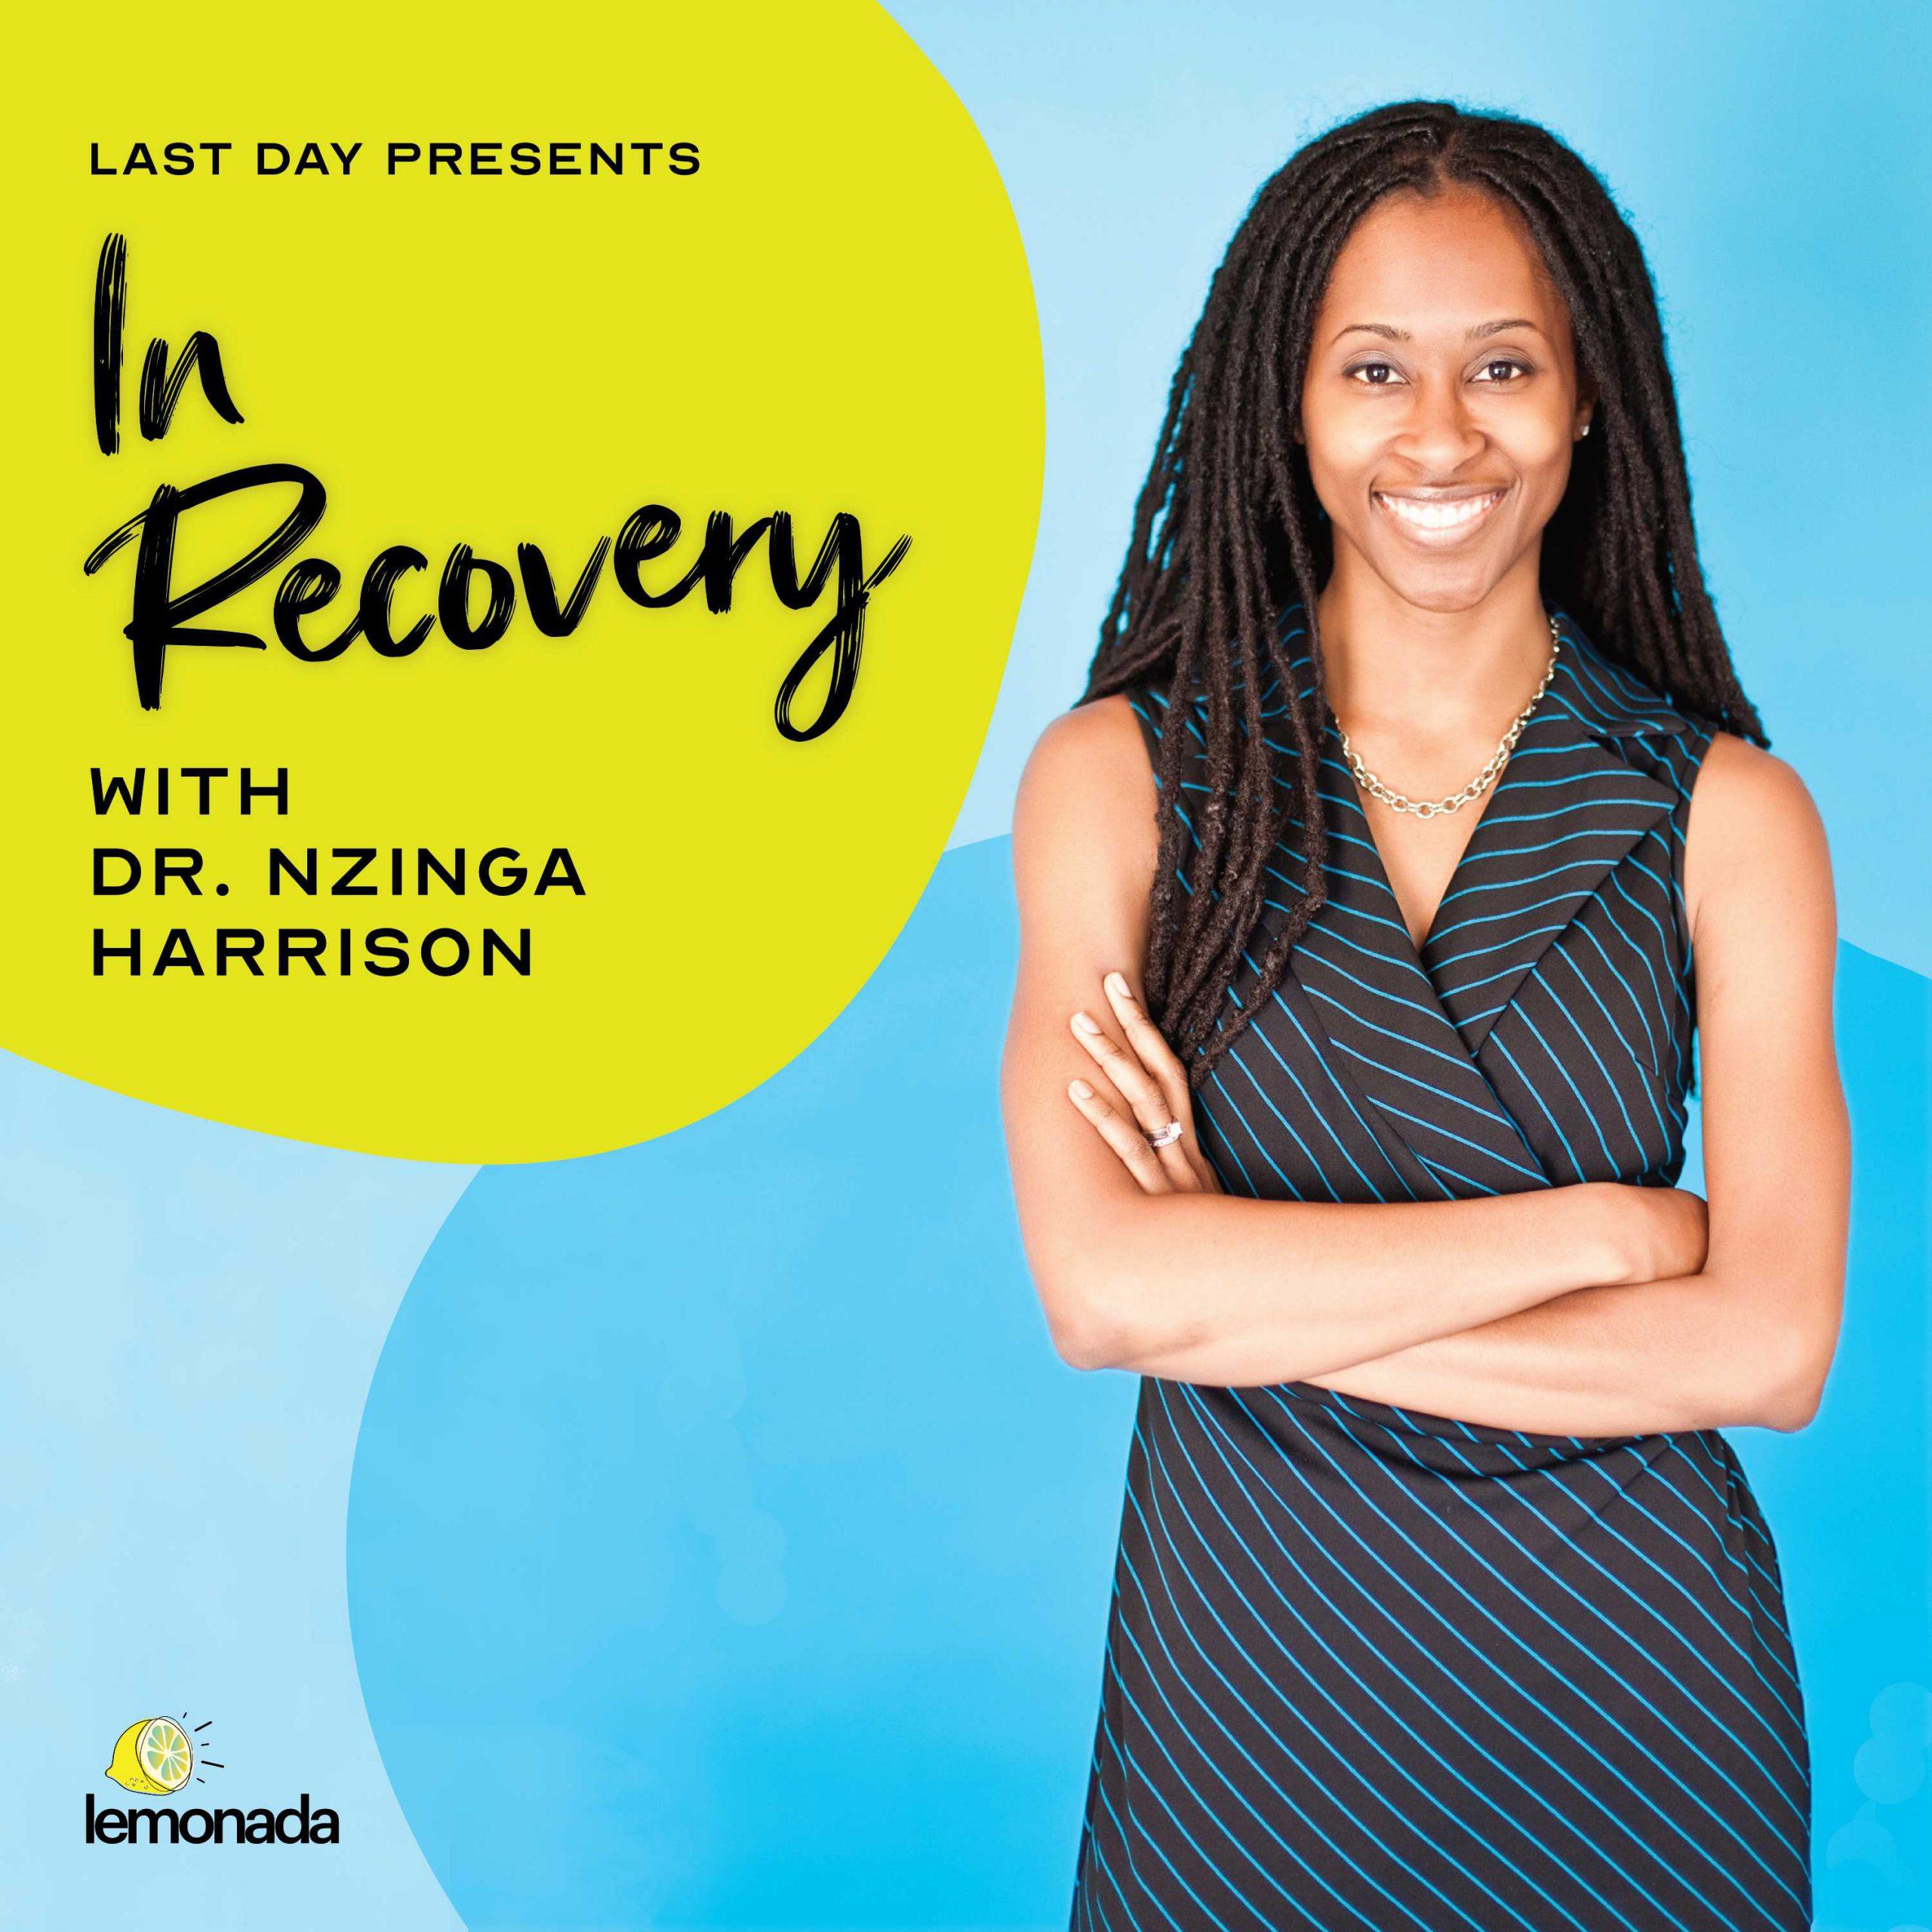 IN RECOVERY, A NEW SERIES AND FOLLOW-UP PODCAST TO LEMONADA MEDIA’S LAST DAY, DEBUTS MAY 18